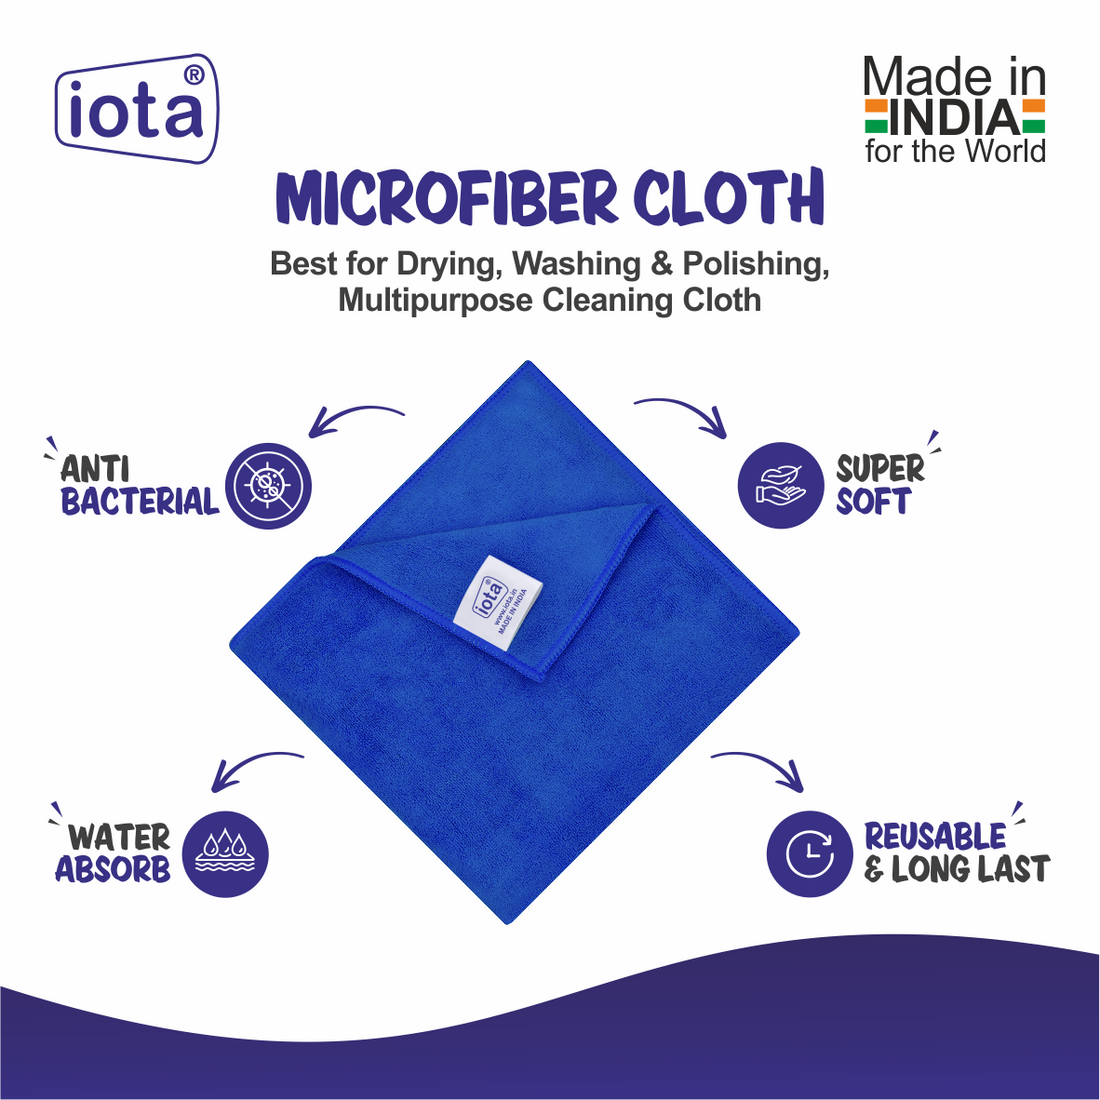 iota Microfiber Cleaning Cloth 60x40cms 450 GSM Highly Absorbent Microfiber Cloth for Home and Kitchen